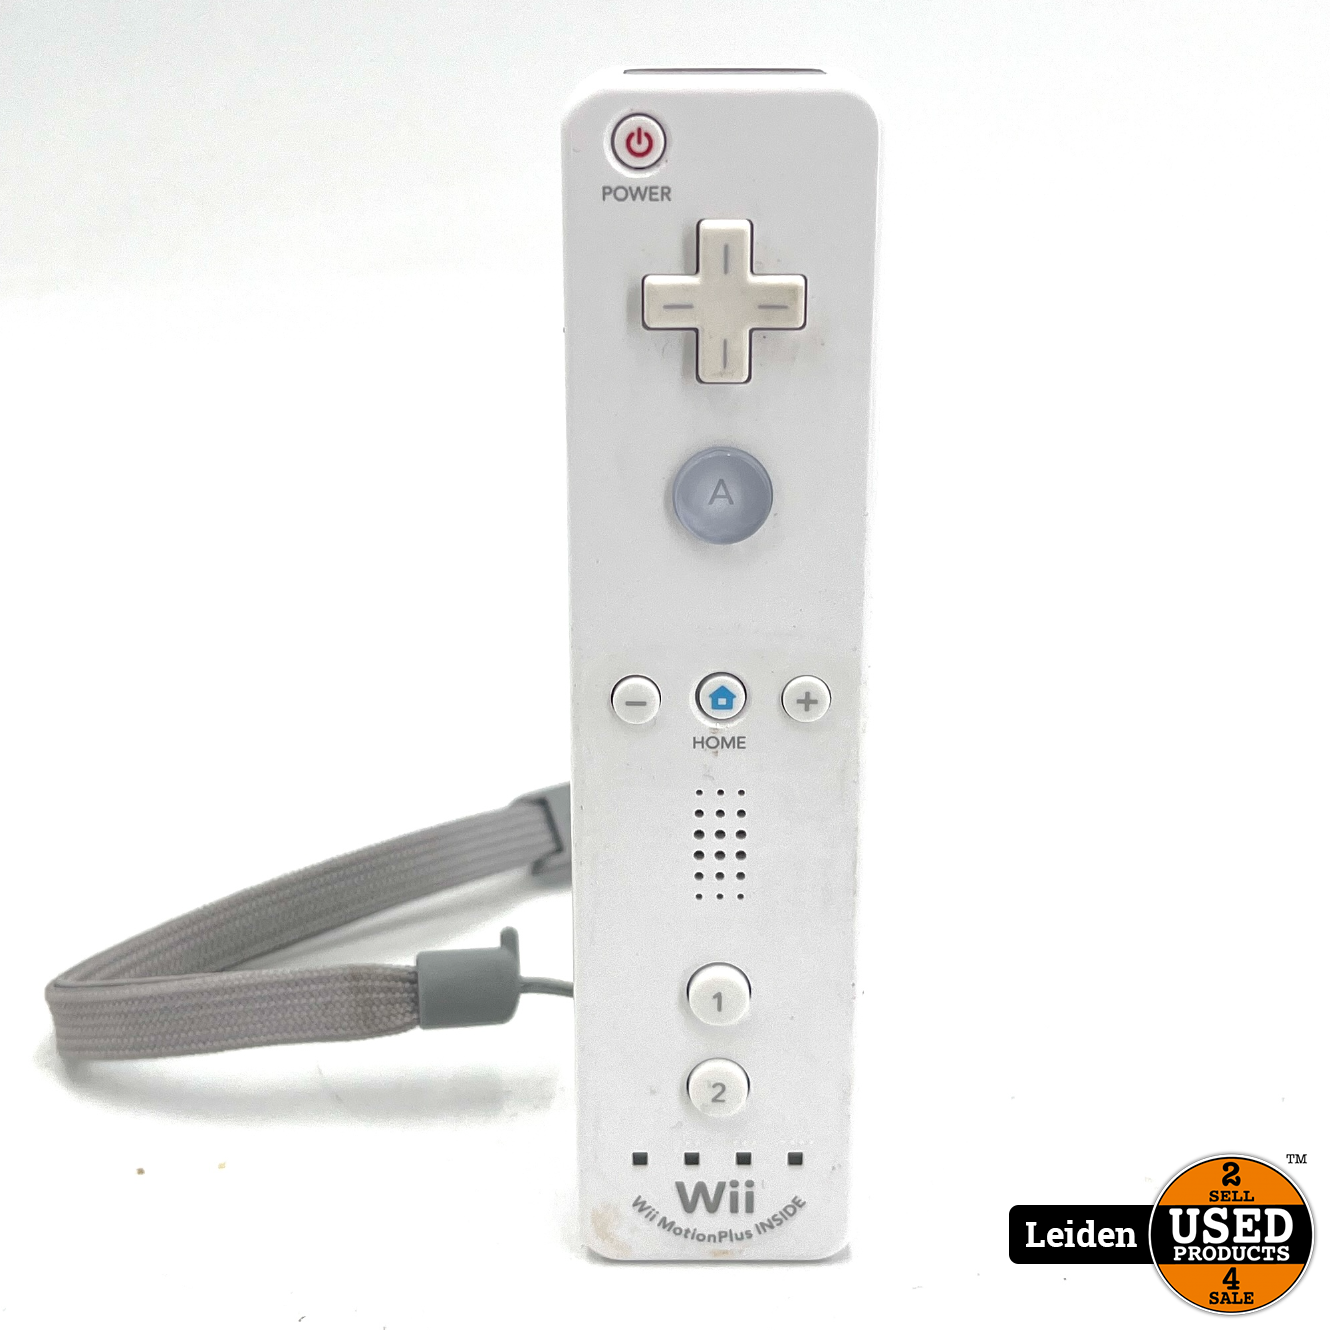 Nintendo Wii Controller + Motion Plus - Wit - Used Products Leiden